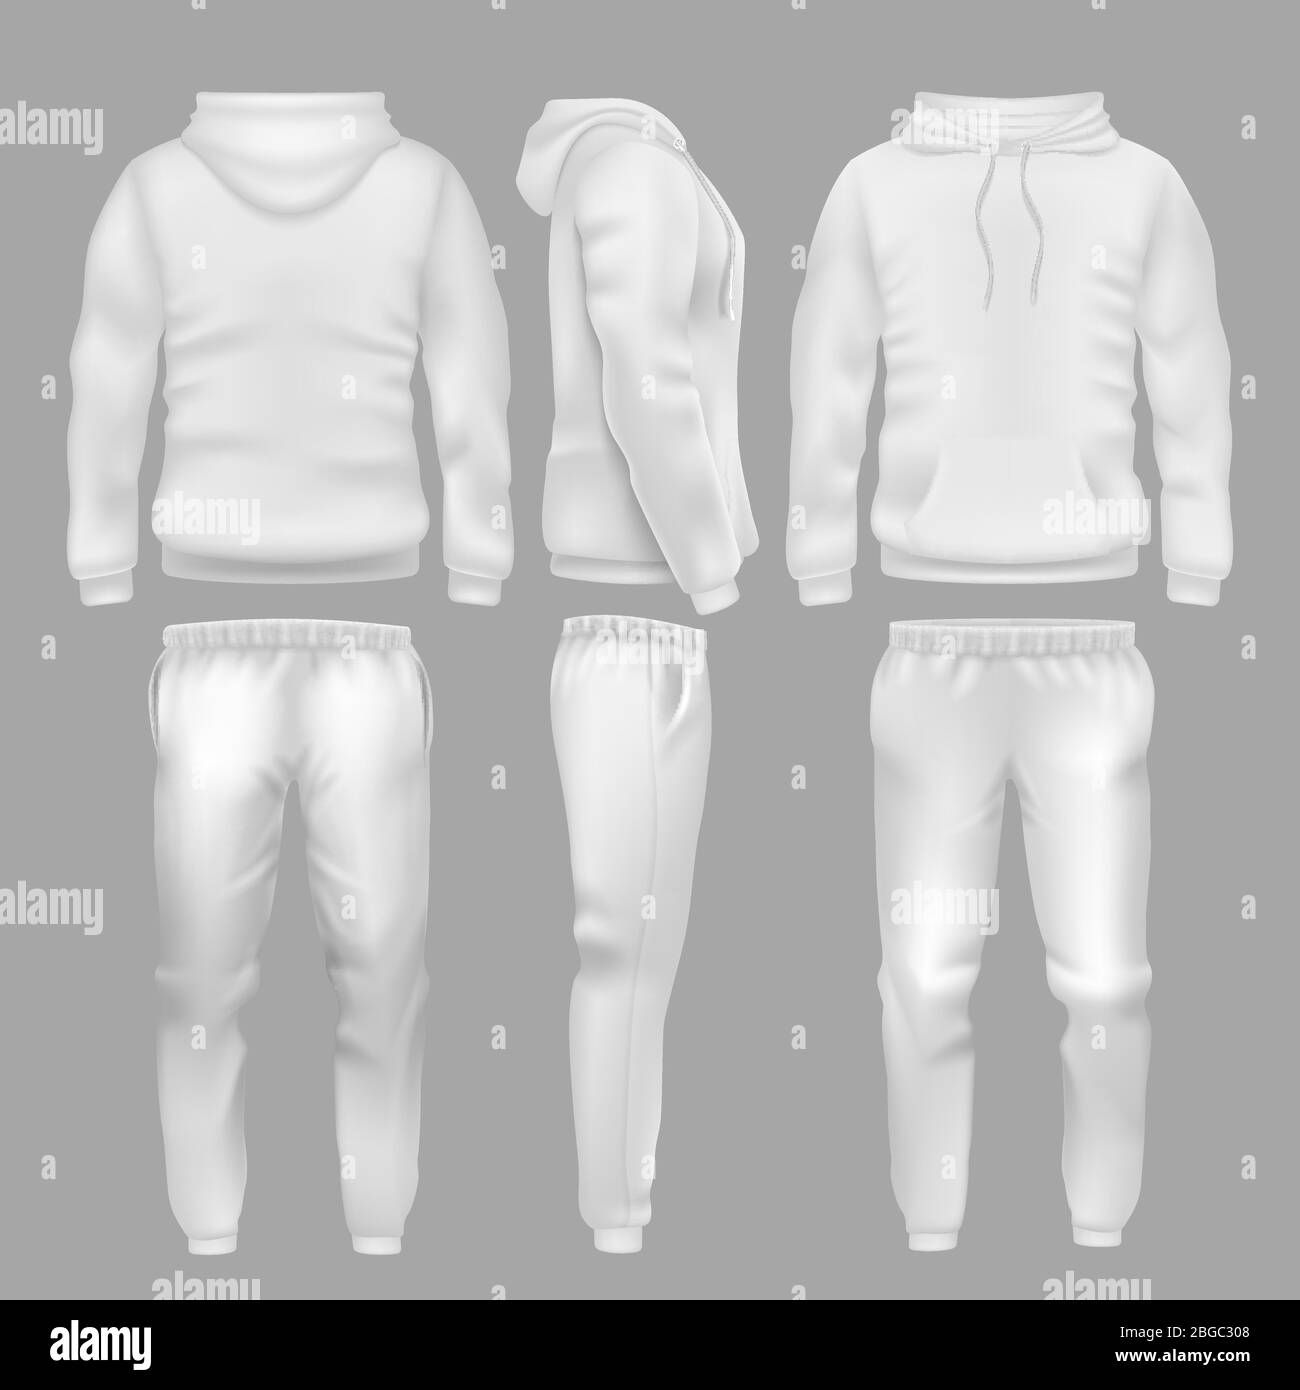 White hooded sweatshirt with sports trousers. Active sport wear hoodie and pants vector templates. Sportswear sweatshirt hoodie and urban pants illustration Stock Vector